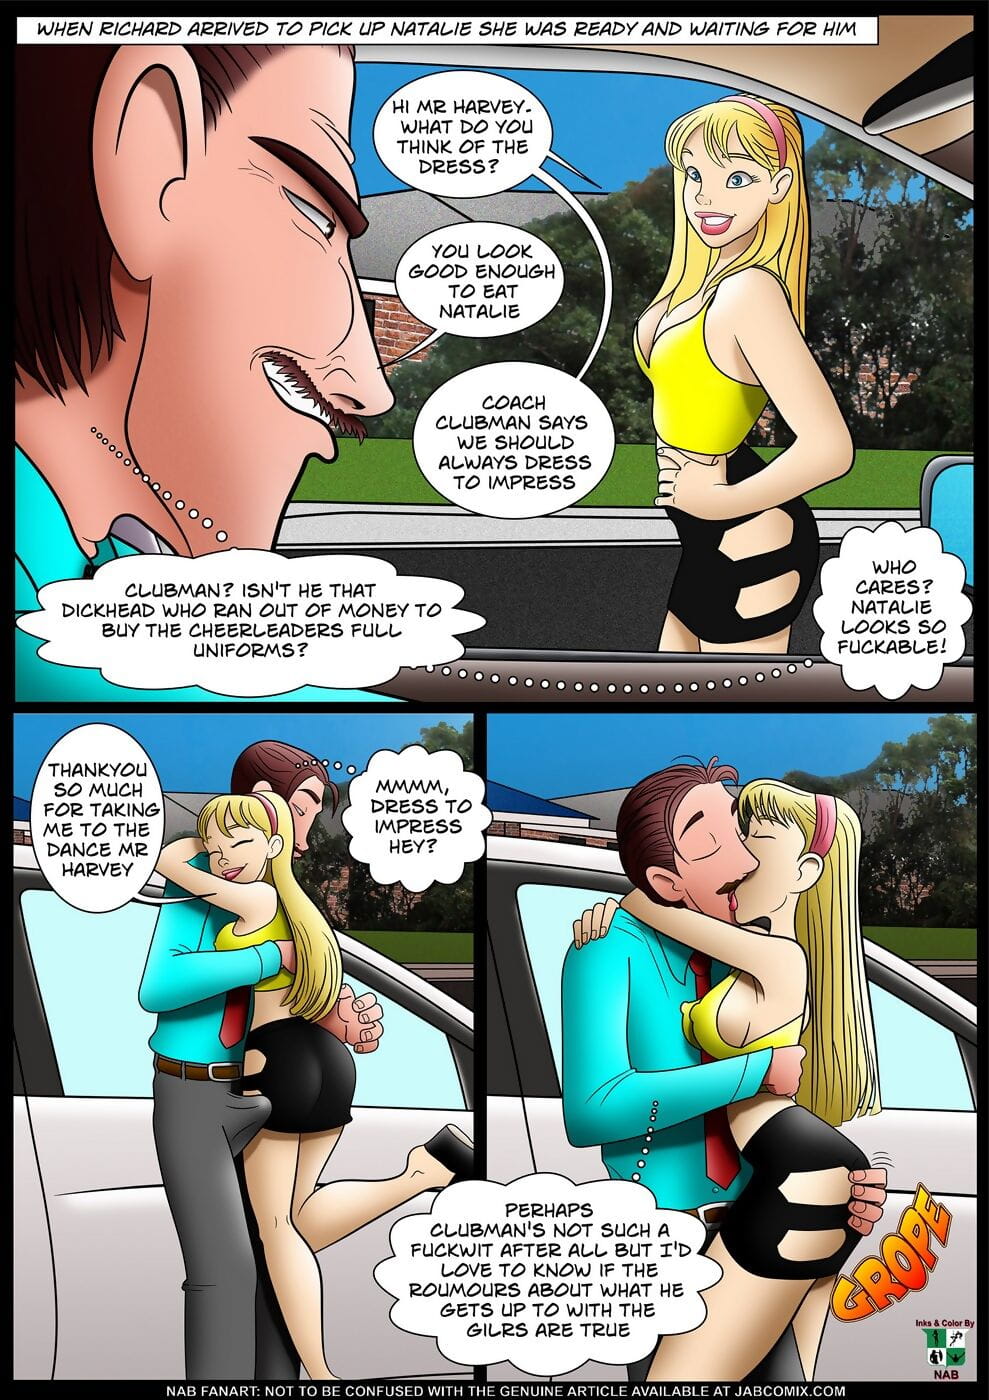 nab Oh daddy! – who’s Ihre daddy? page 1